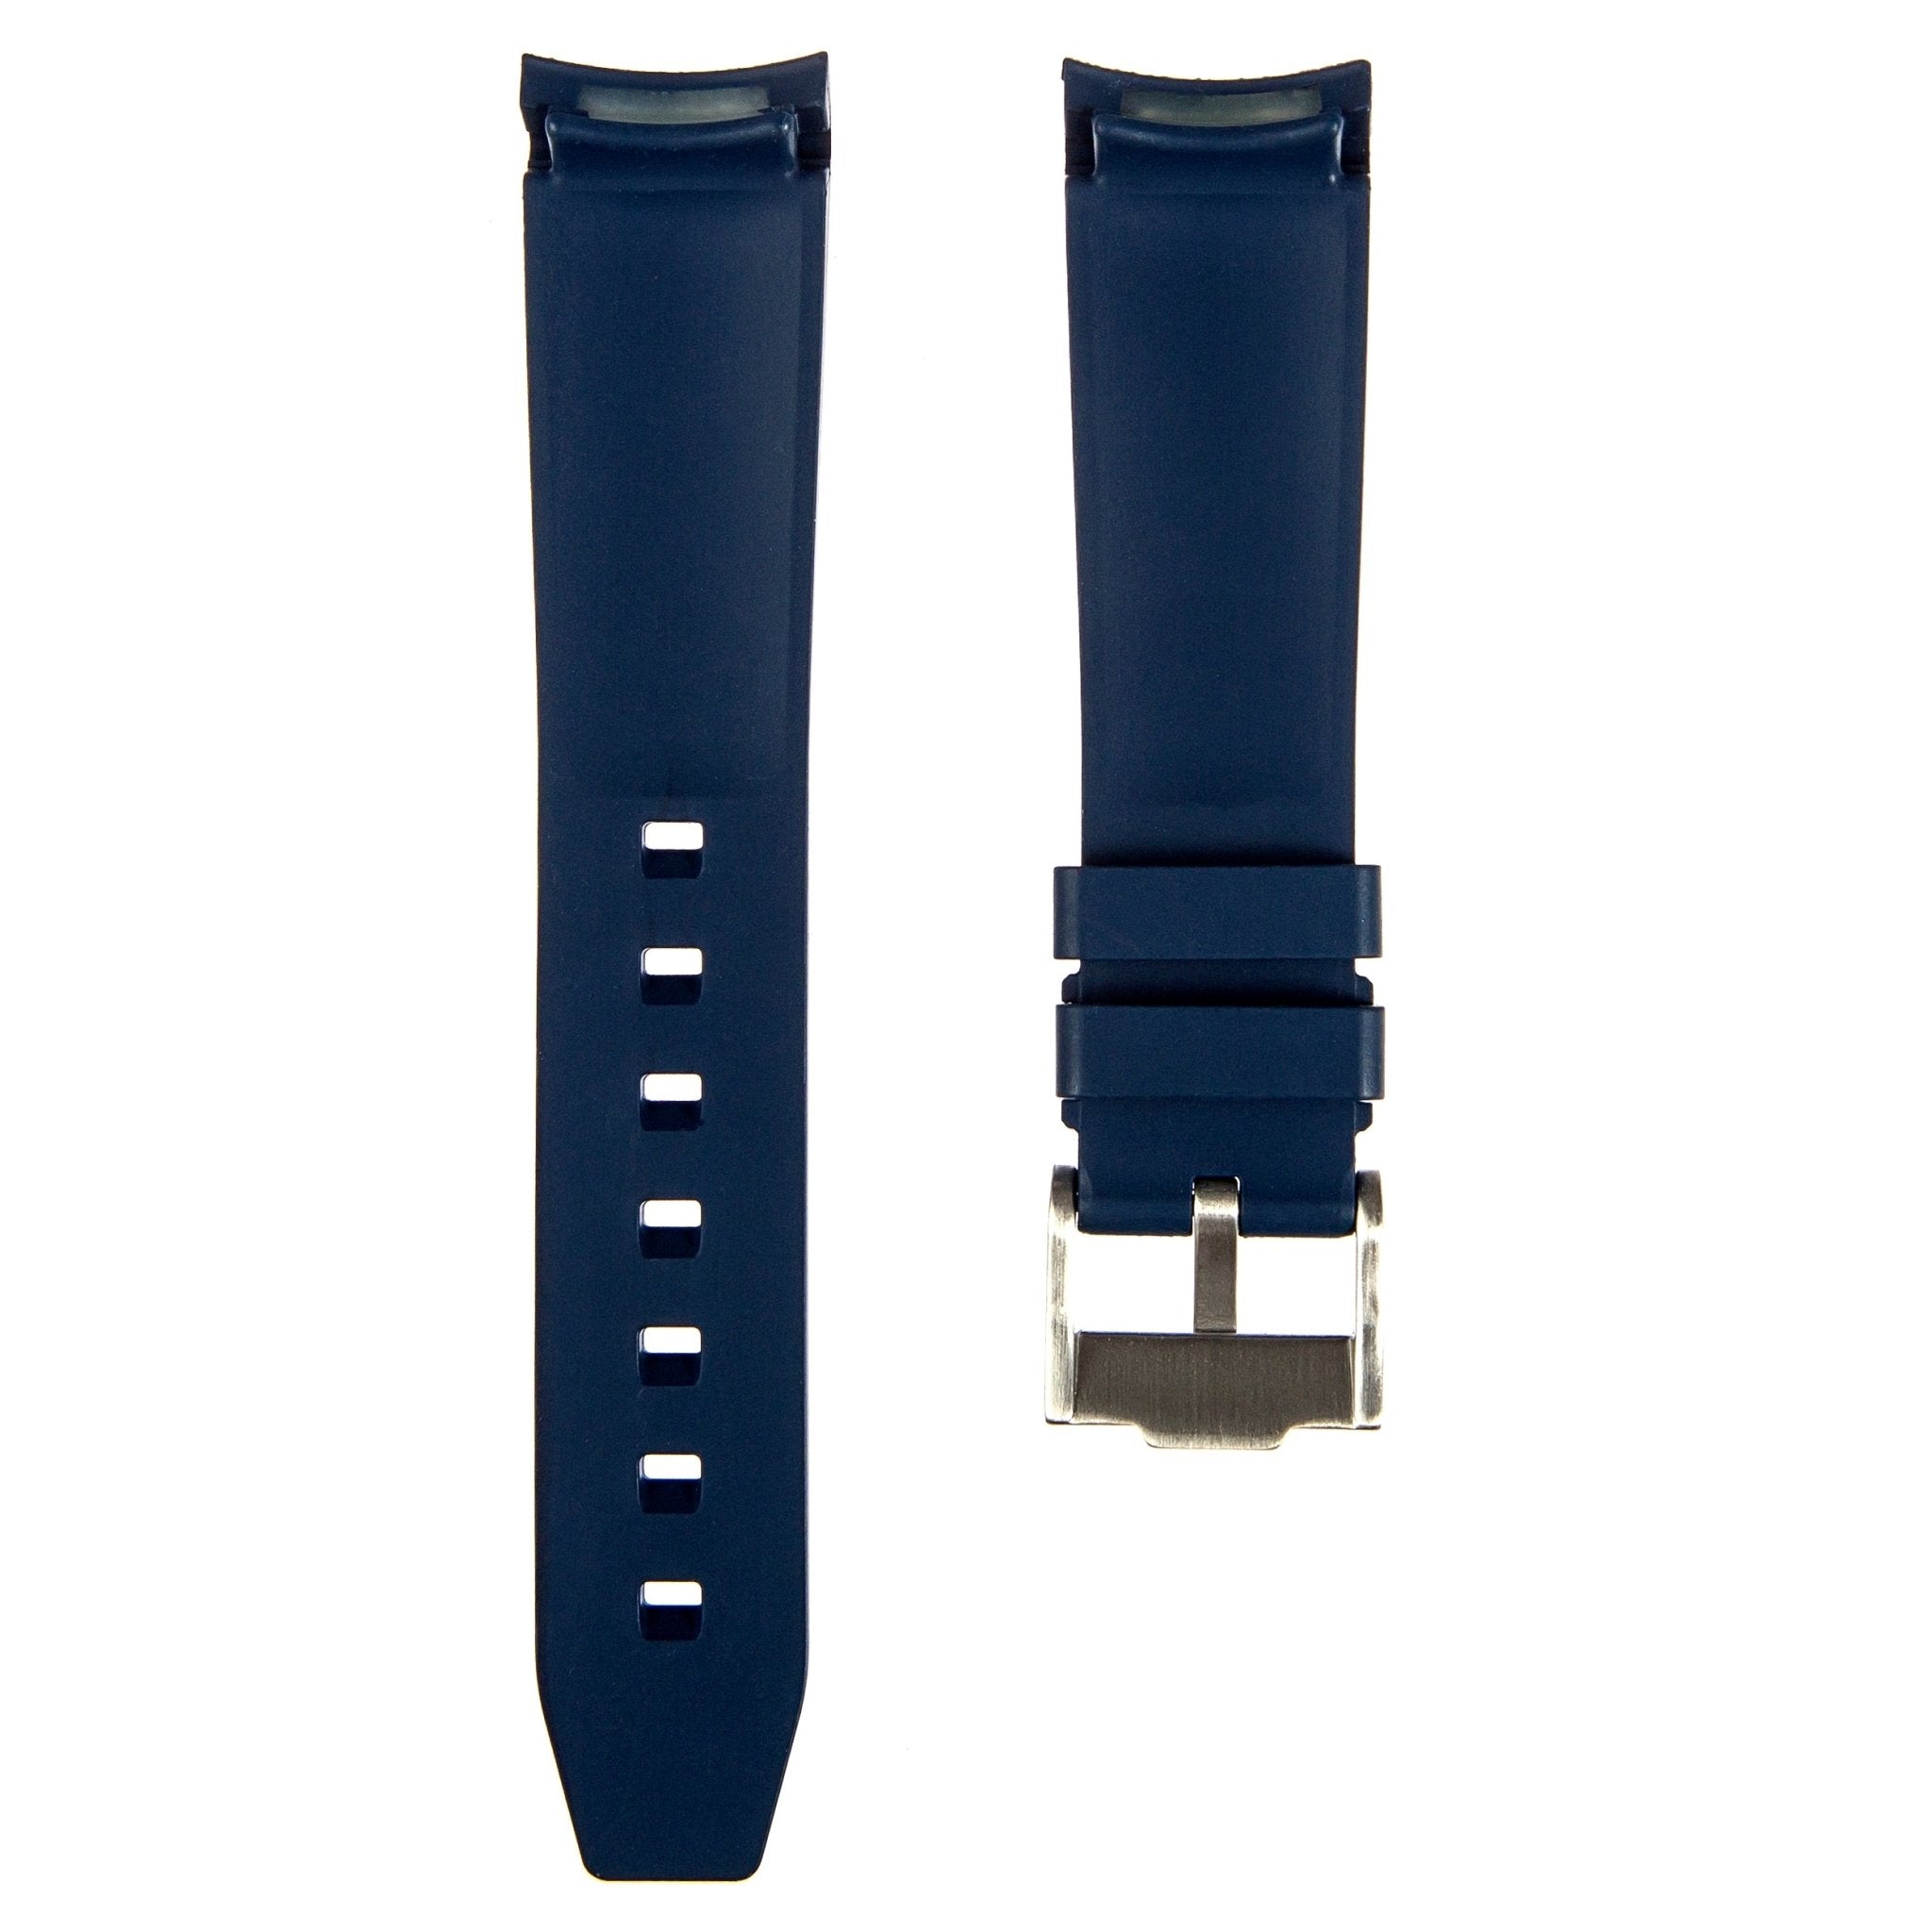 Forge Curved End FKM Rubber Strap – Navy (2421) -Strapseeker